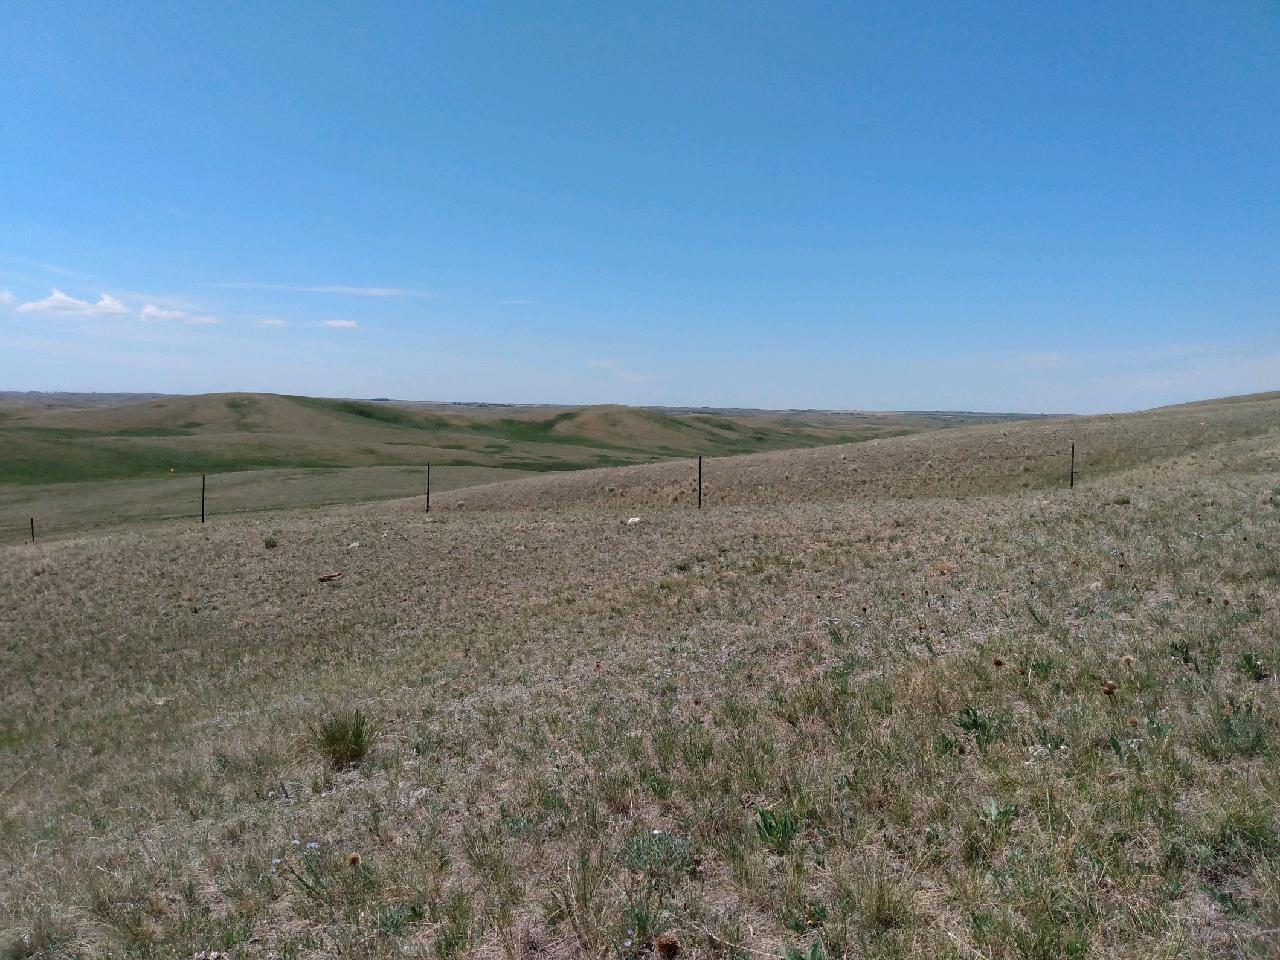 Morning Ag News, March 29, 2022: Drought concerns increase for areas of  South Dakota